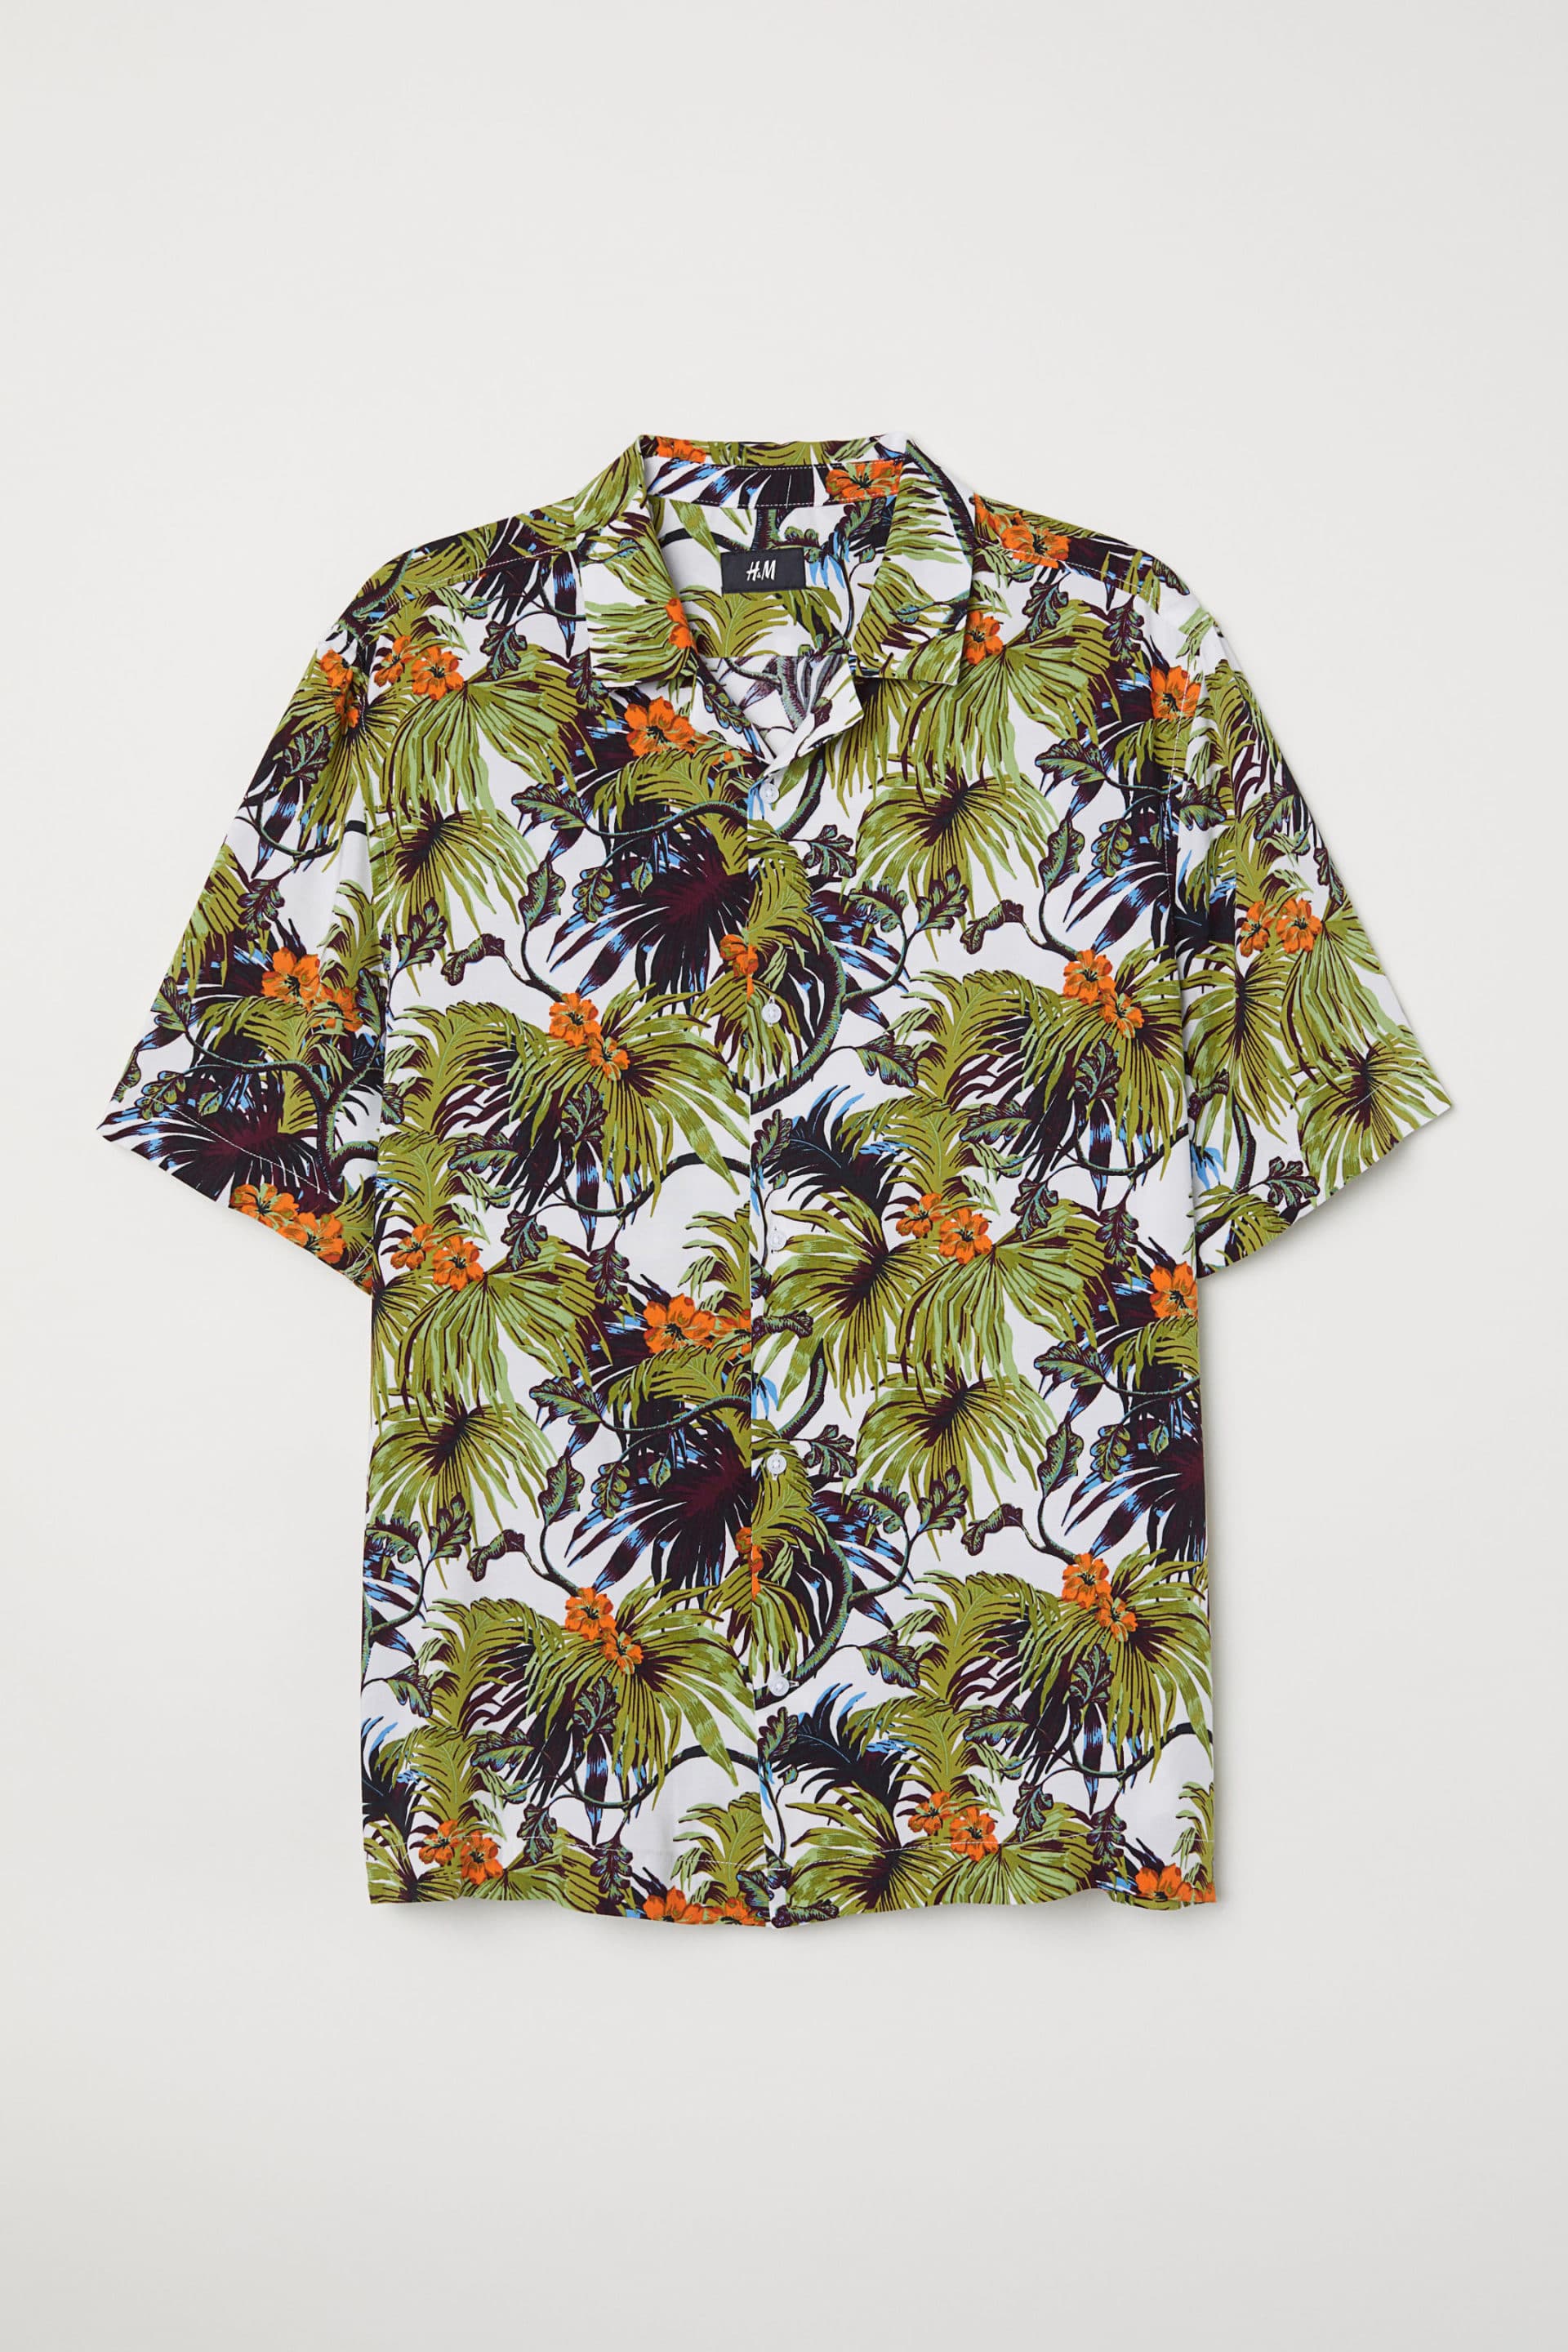 Hawaiian Shirts for Men - our pick of the best | The Book of Man